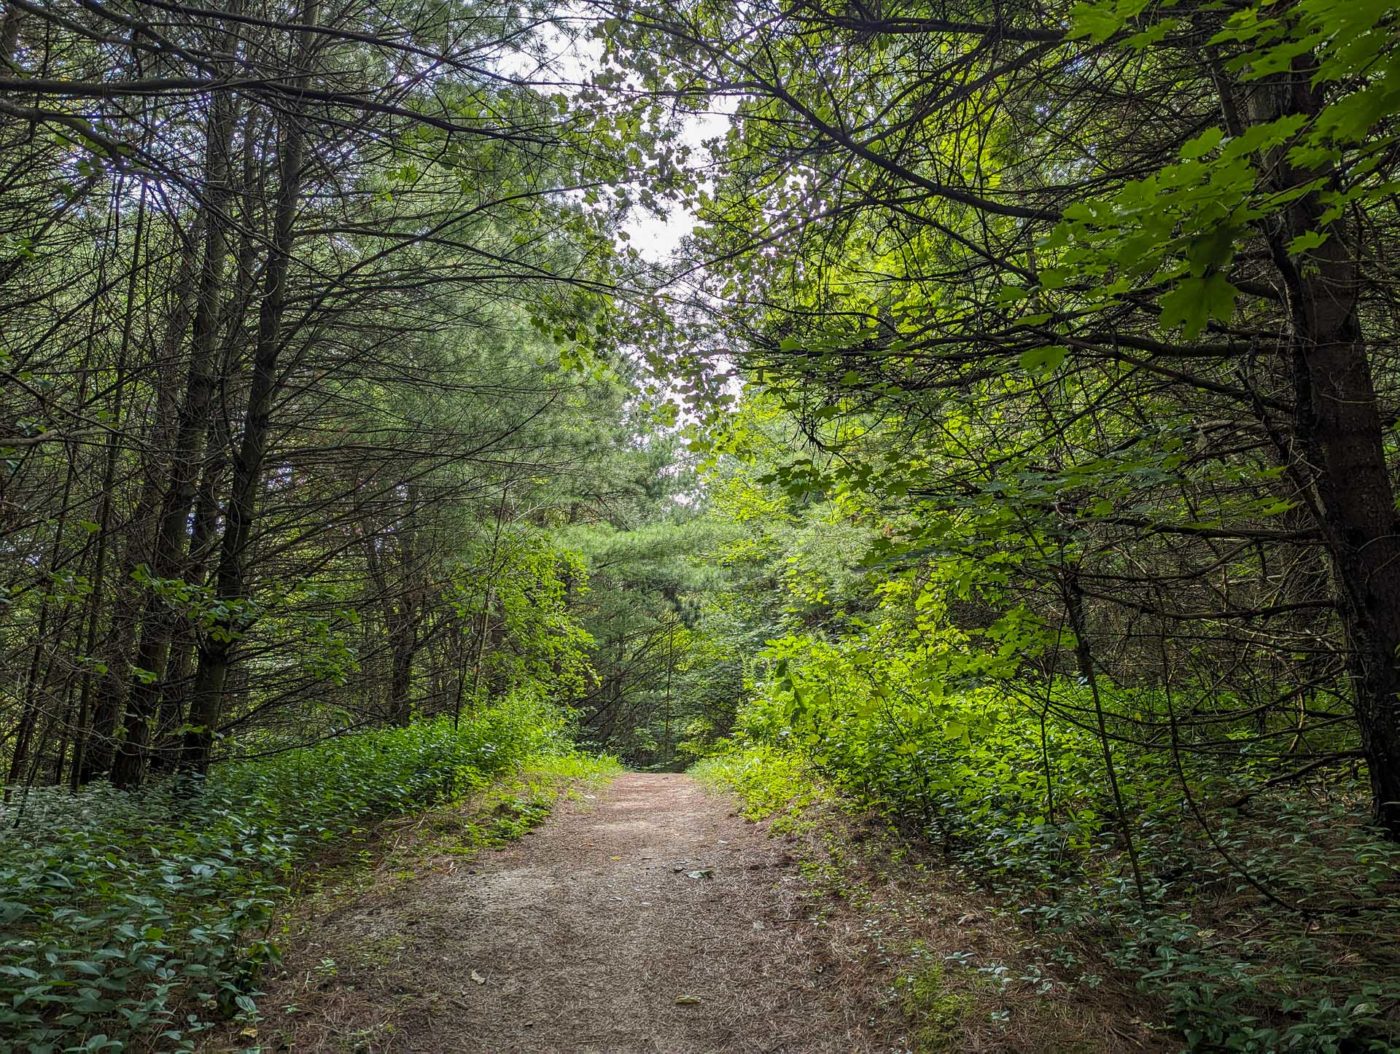 A dirt path in the woods with trees in the background.